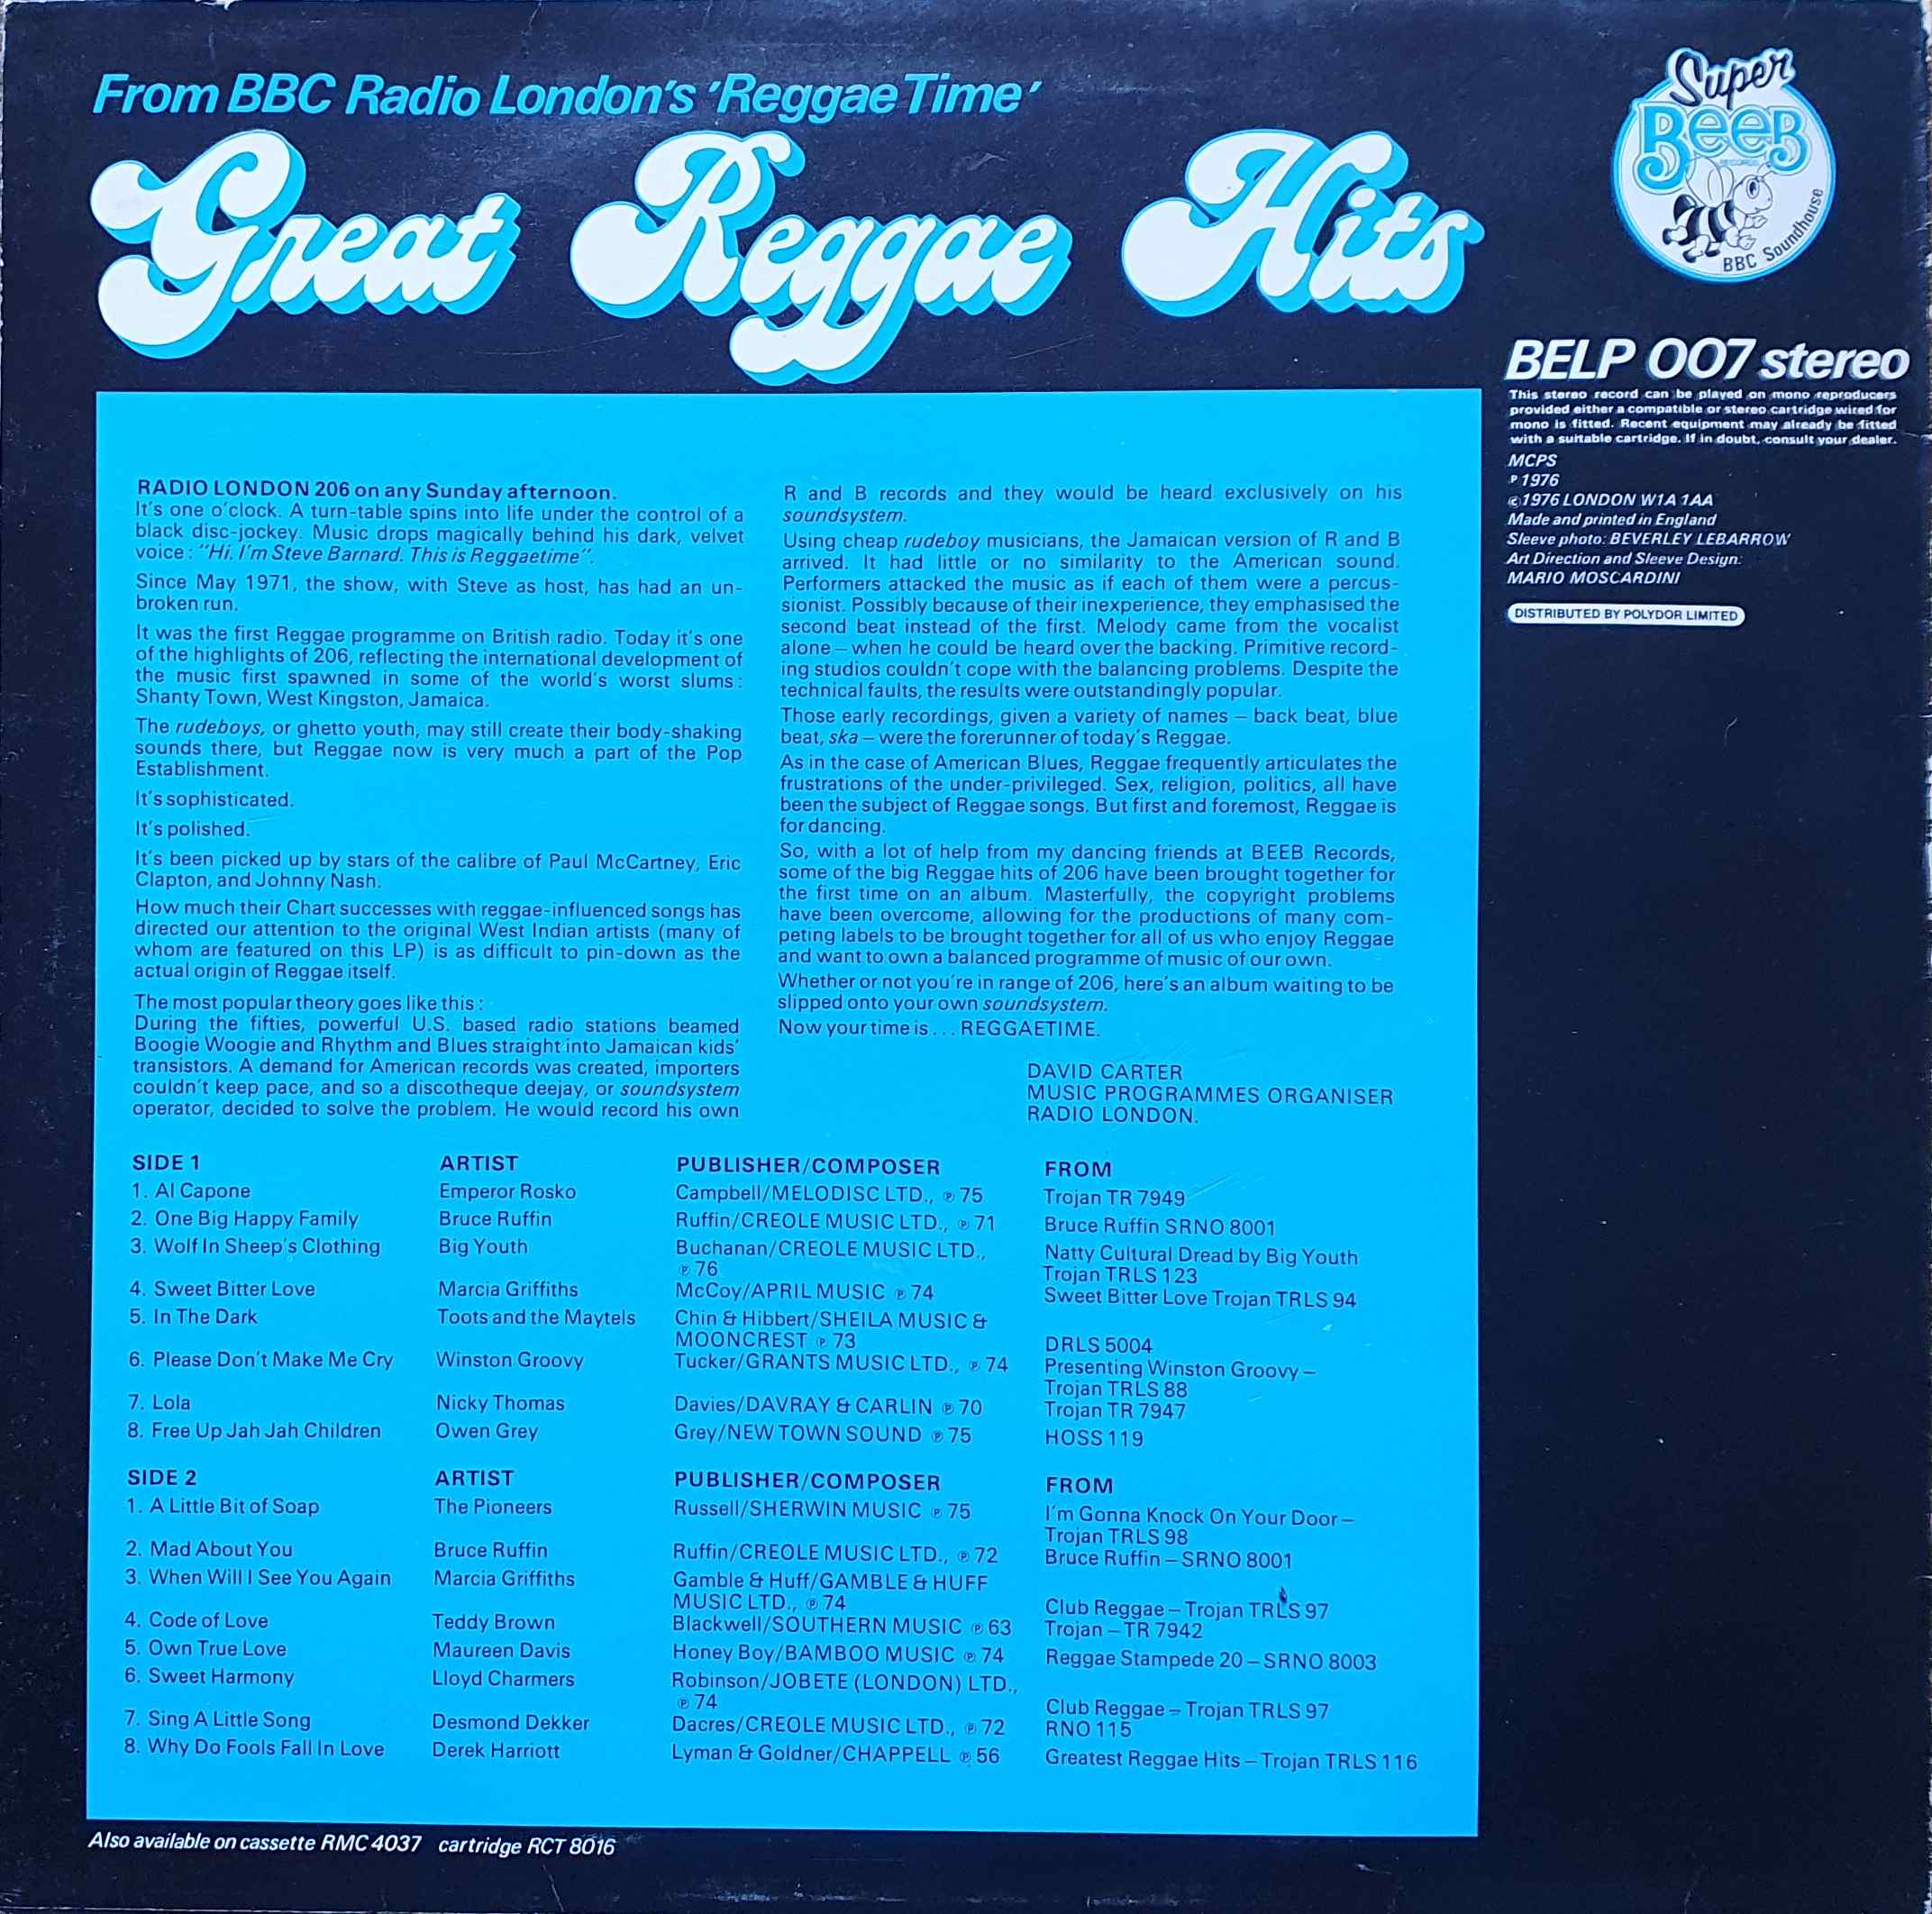 Picture of BELP 007 16 great reggae hits  by artist Various from the BBC records and Tapes library